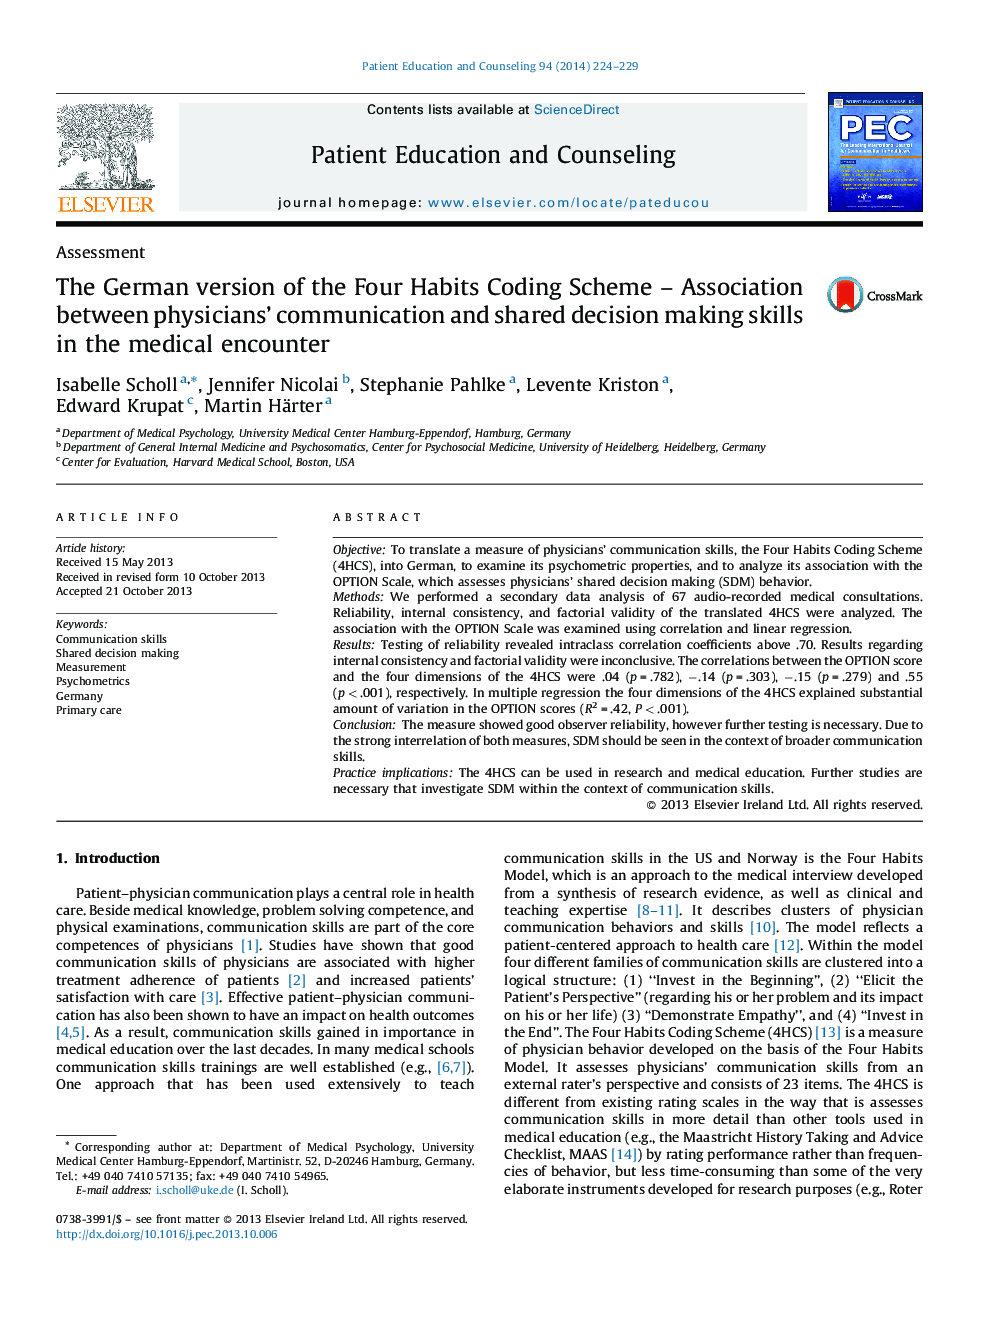 The German version of the Four Habits Coding Scheme – Association between physicians’ communication and shared decision making skills in the medical encounter